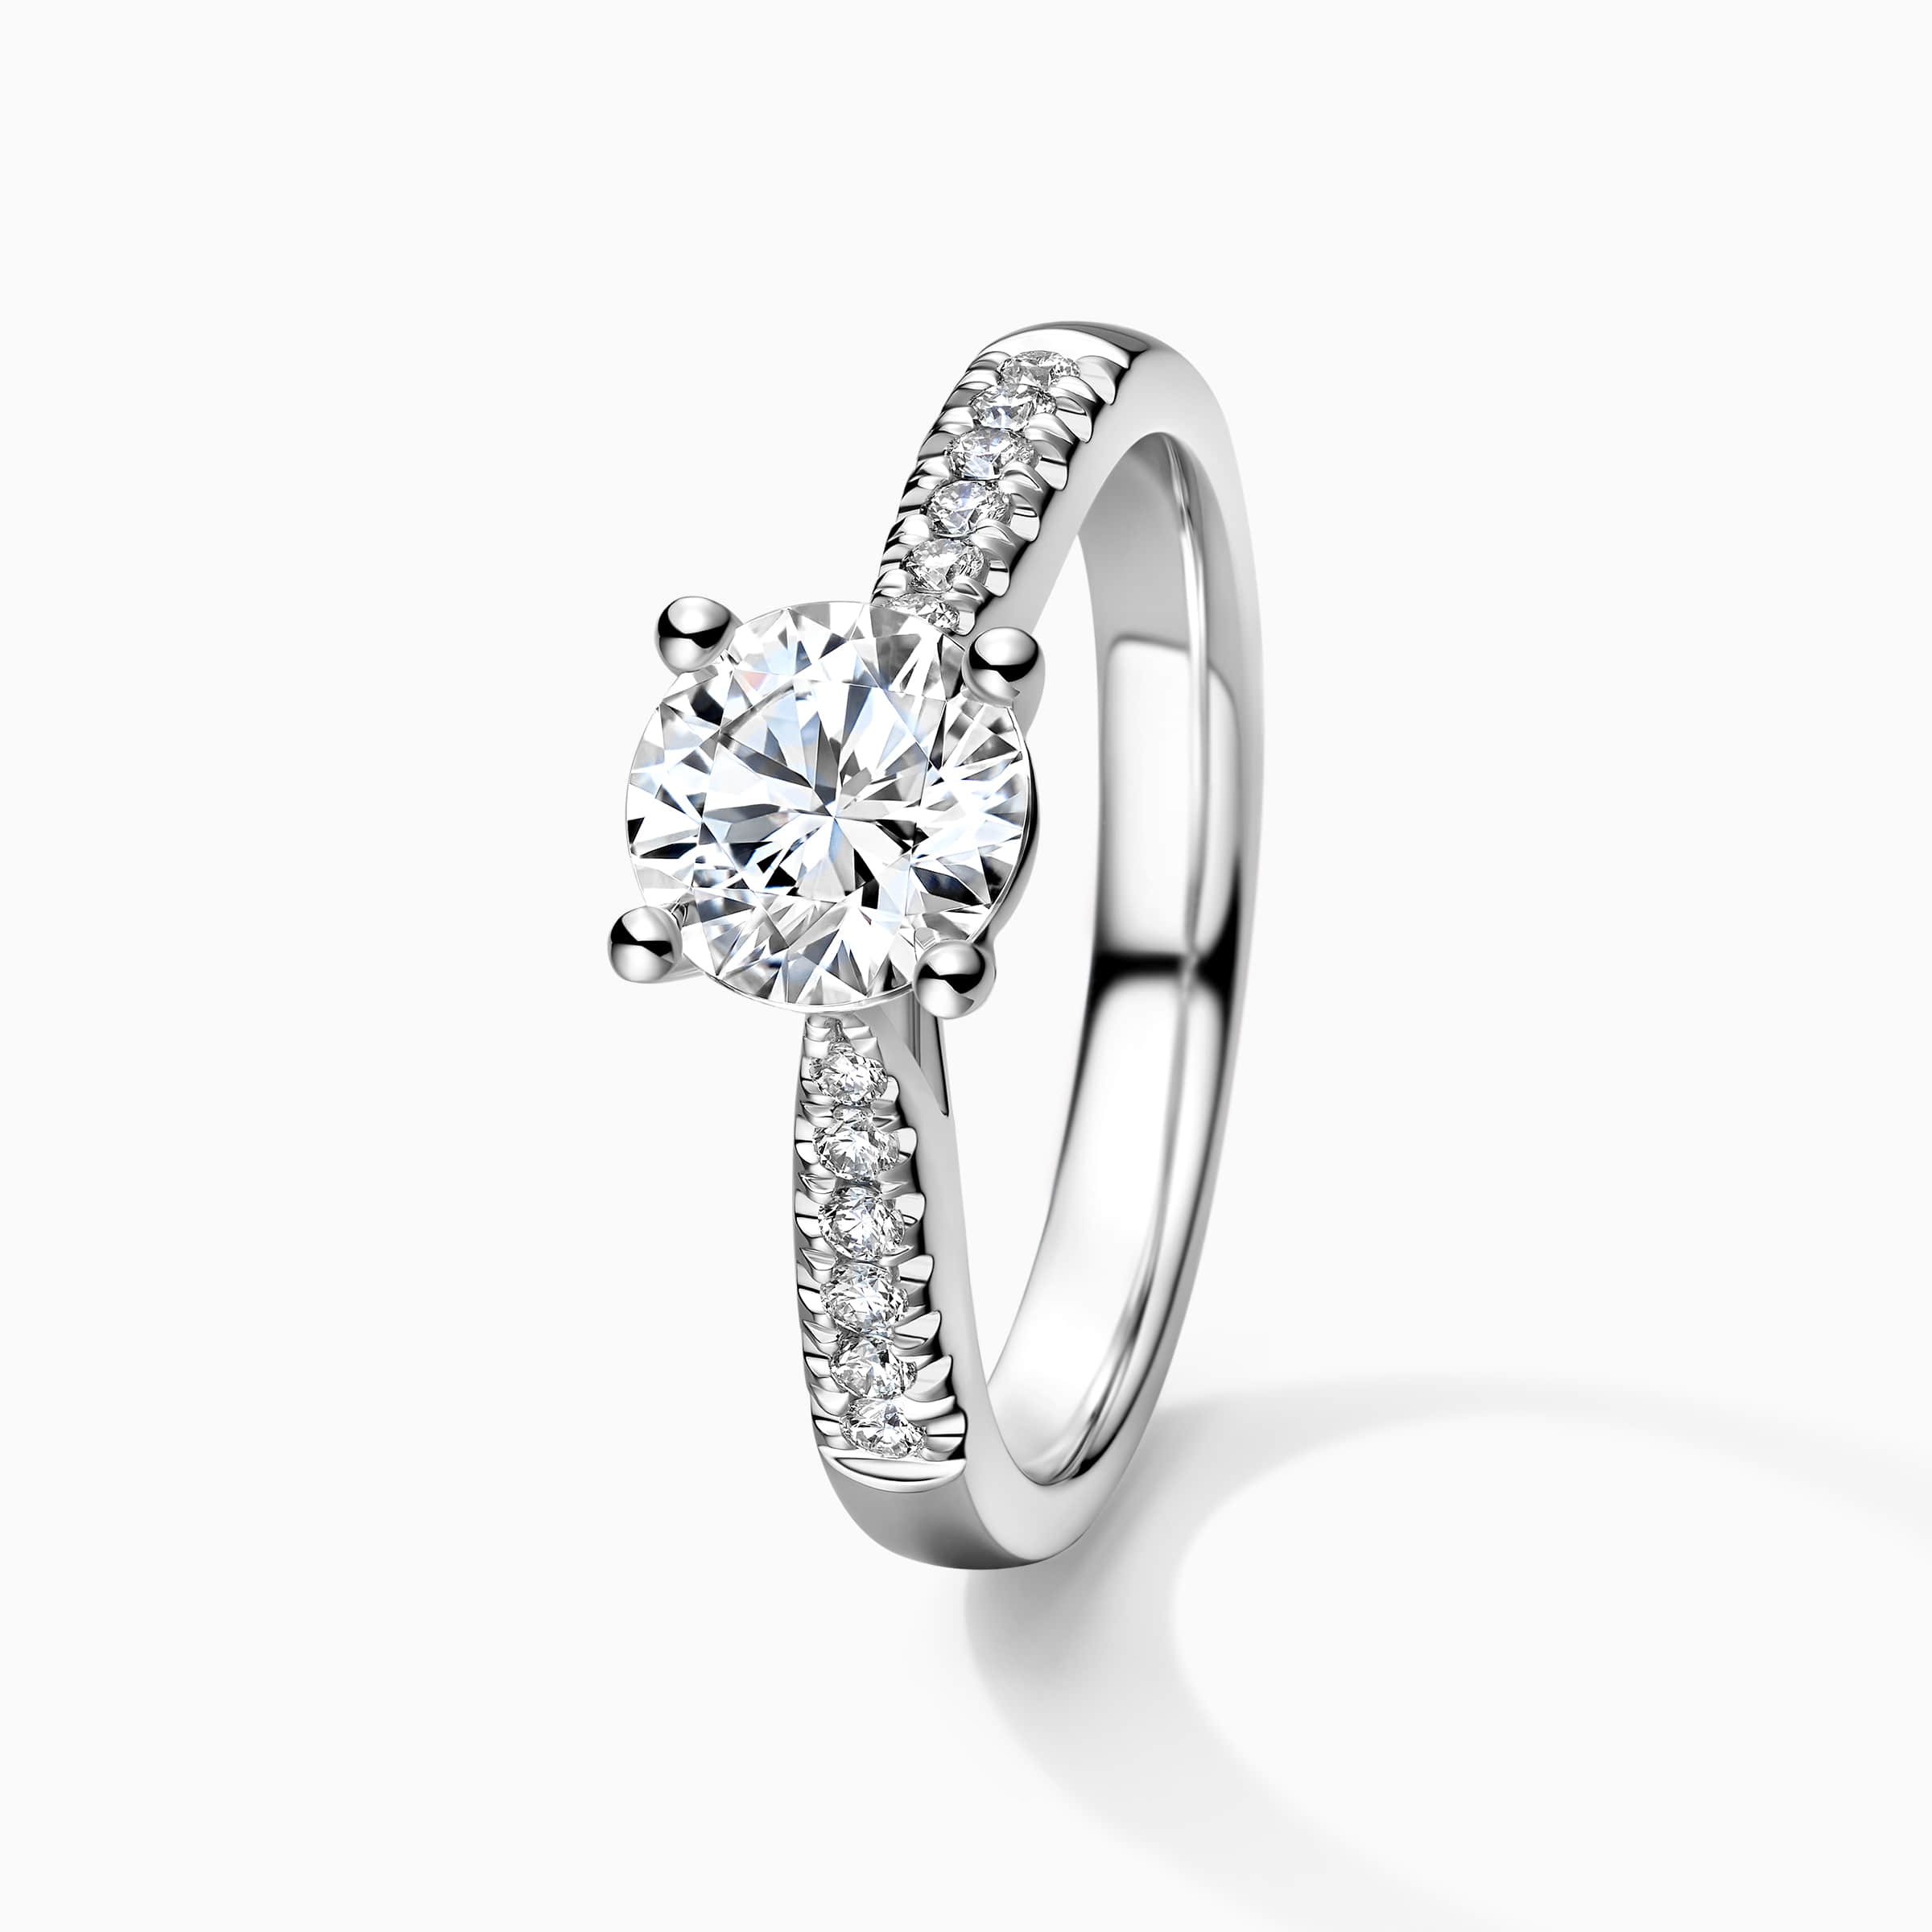 darry ring 4 prong engagement ring angle view